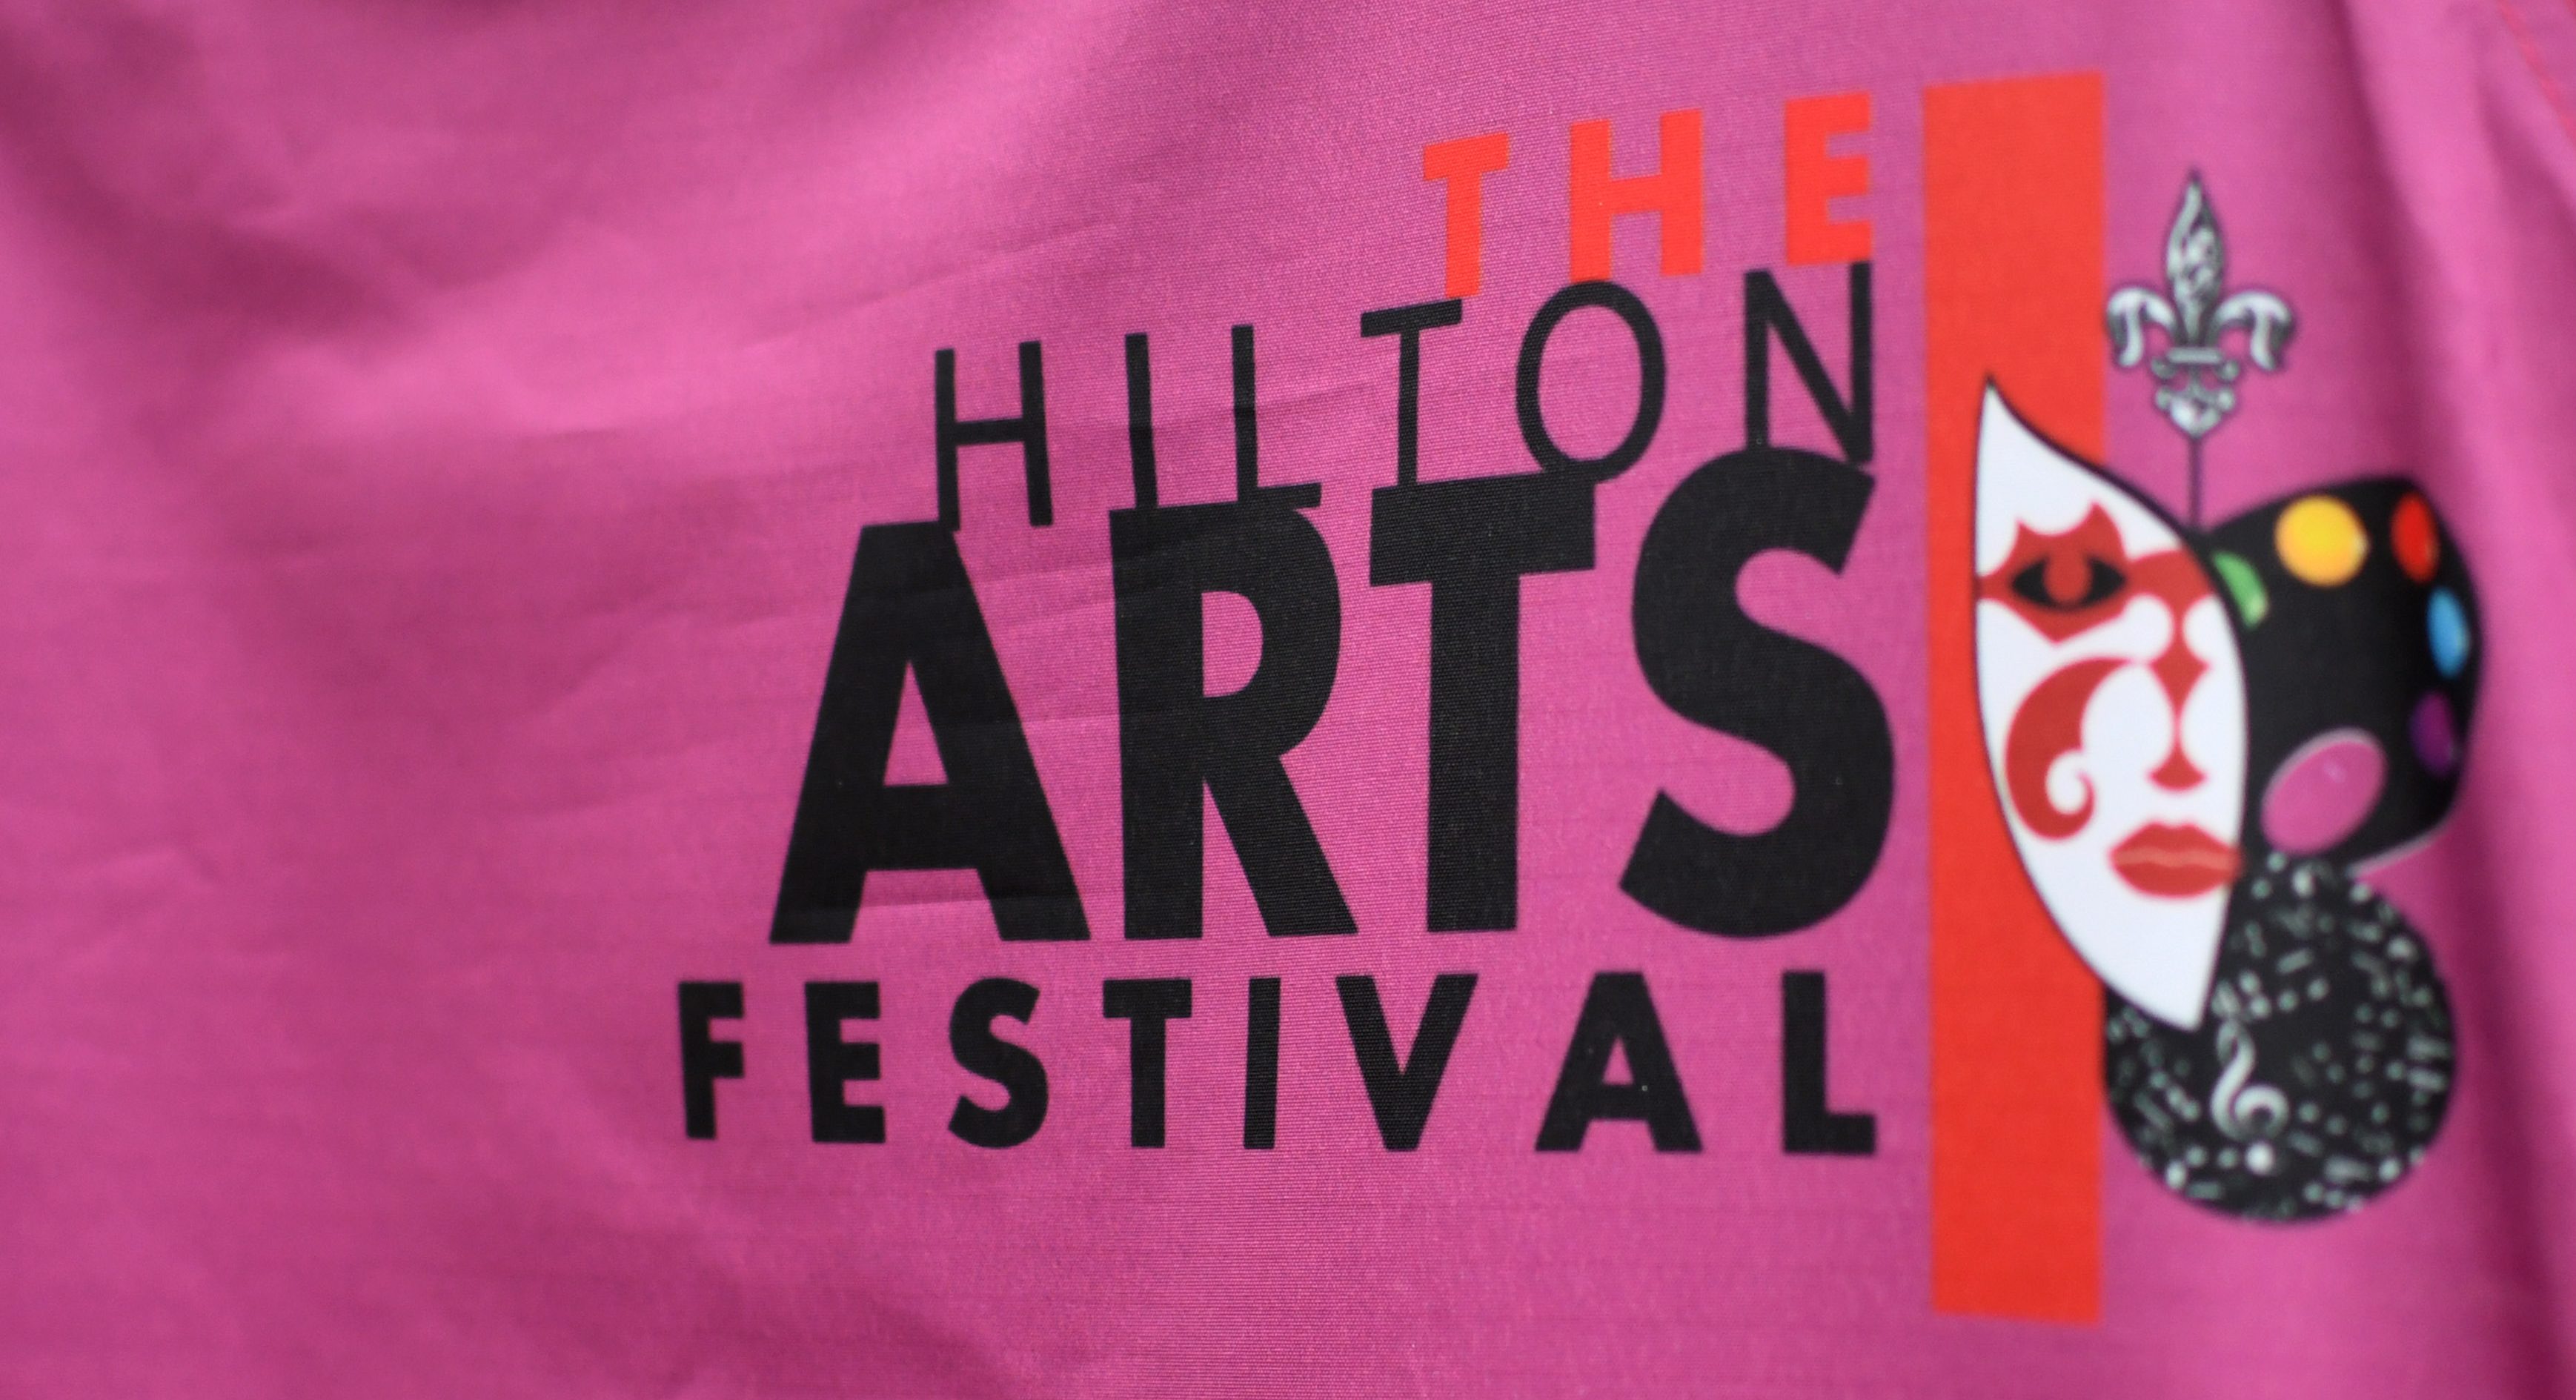 PIETERMARITZBURG, SOUTH AFRICA - SEPTEMBER 14: The Hilton Arts Festival 2019 at Hilton College Theatre on September 14, 2019 in Pietermaritzburg, South Africa. The festival, which largest theatrical event of its kind in KwaZulu-Natal, aims to bring the pick of South Africa?s high quality performing art to the province. The festival also includes art exhibitions, quality craft, food and drink, live music. (Photo by Gallo Images/Darren Stewart)